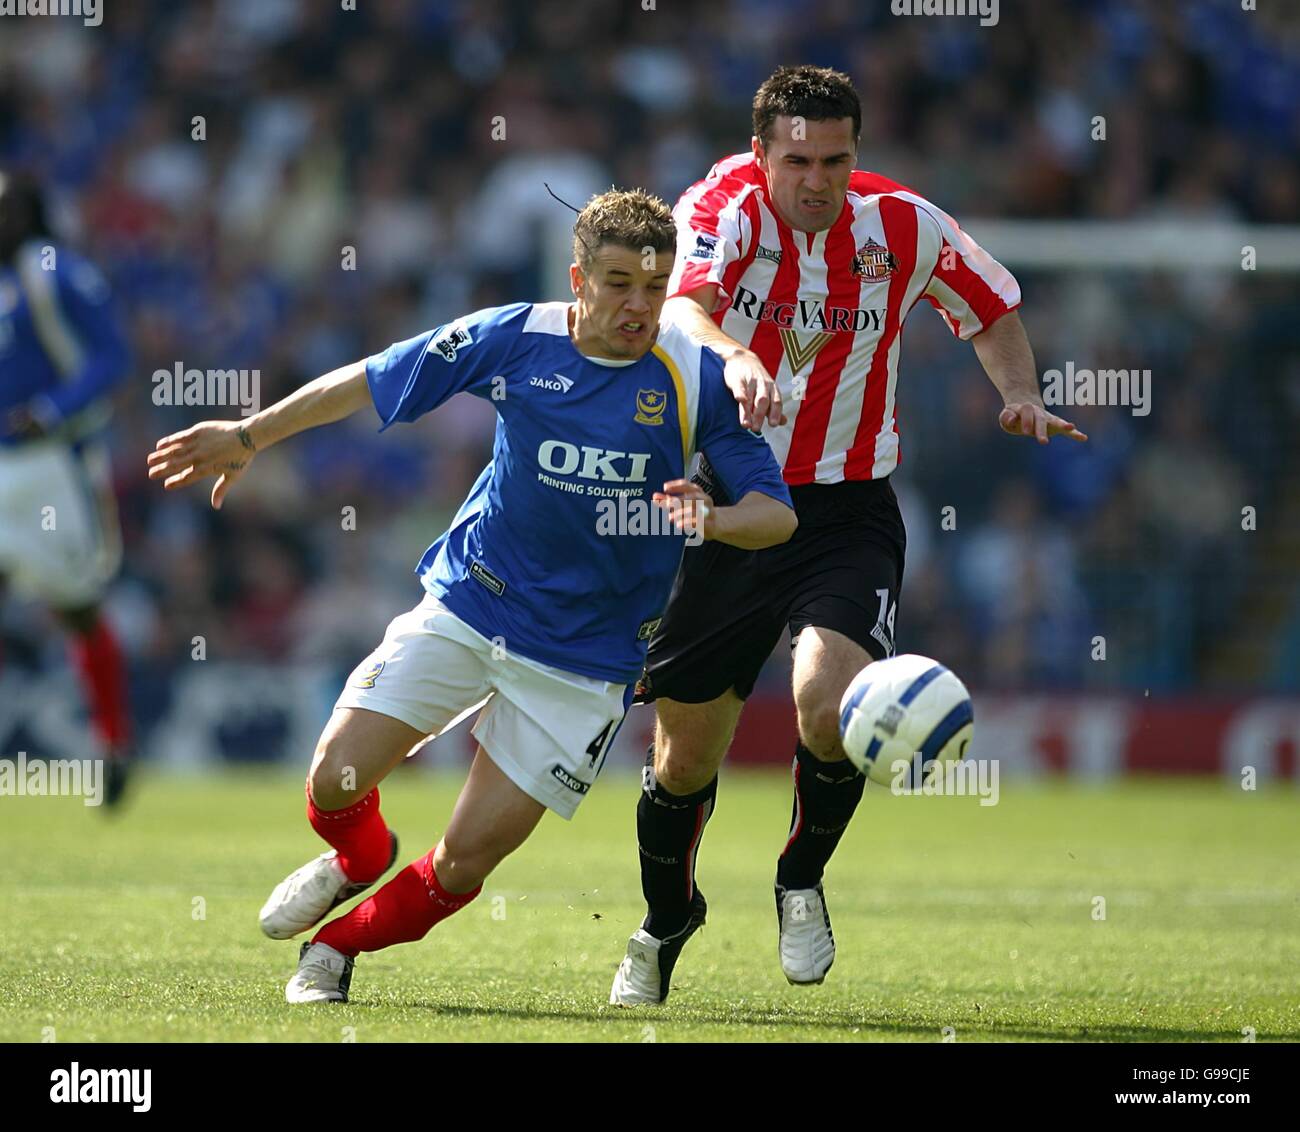 Soccer - FA Barclays Premiership - Portsmouth v Sunderland - Fratton Park. Portsmouth's Andres D'Alessandro is challenged by Sunderland's Tommy Miller Stock Photo